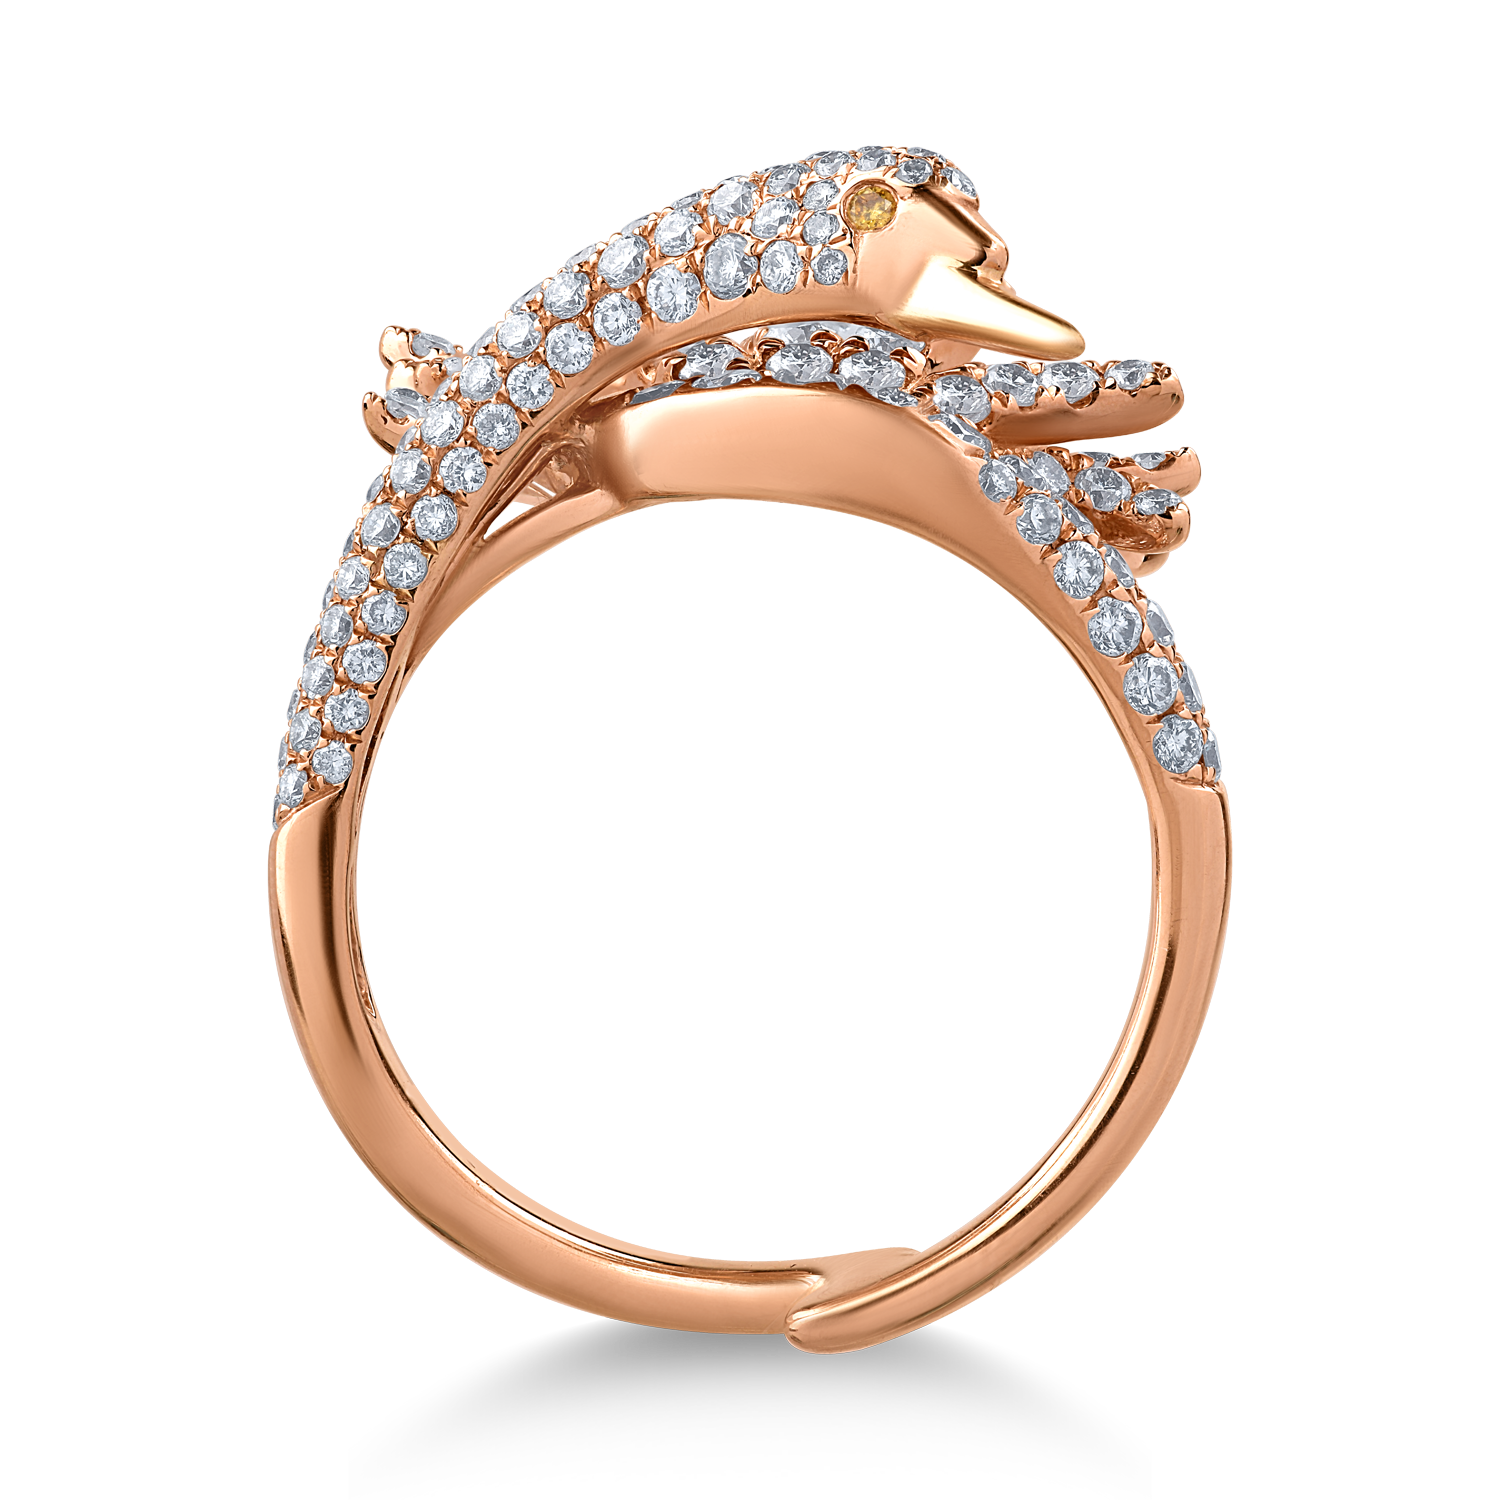 18K rose gold ring with 1.86ct diamonds